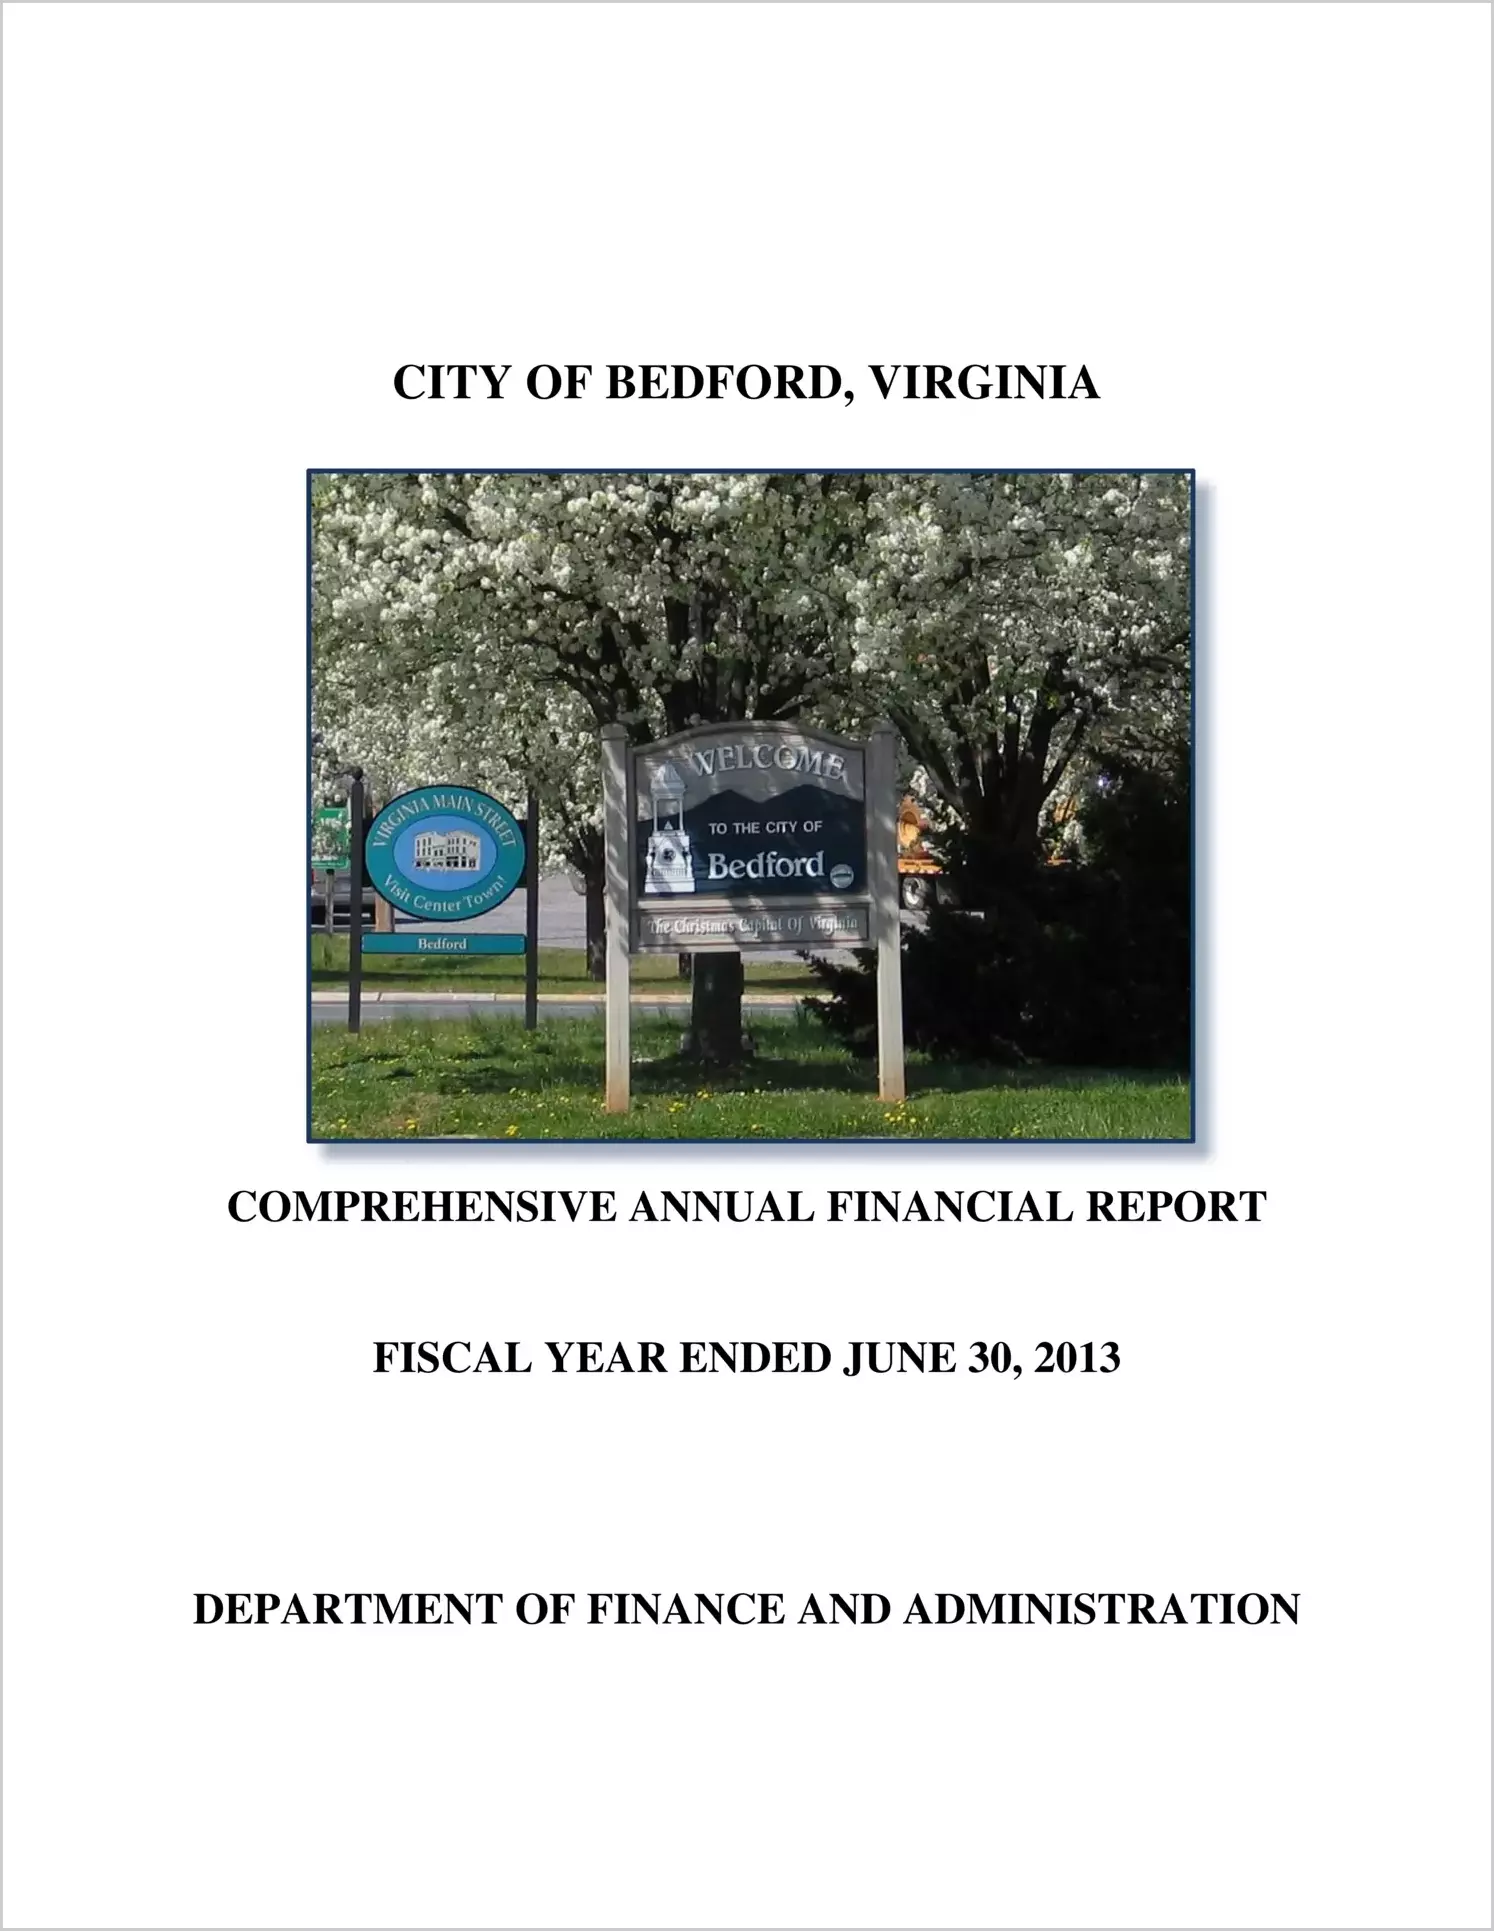 2013 Annual Financial Report for City of Bedford